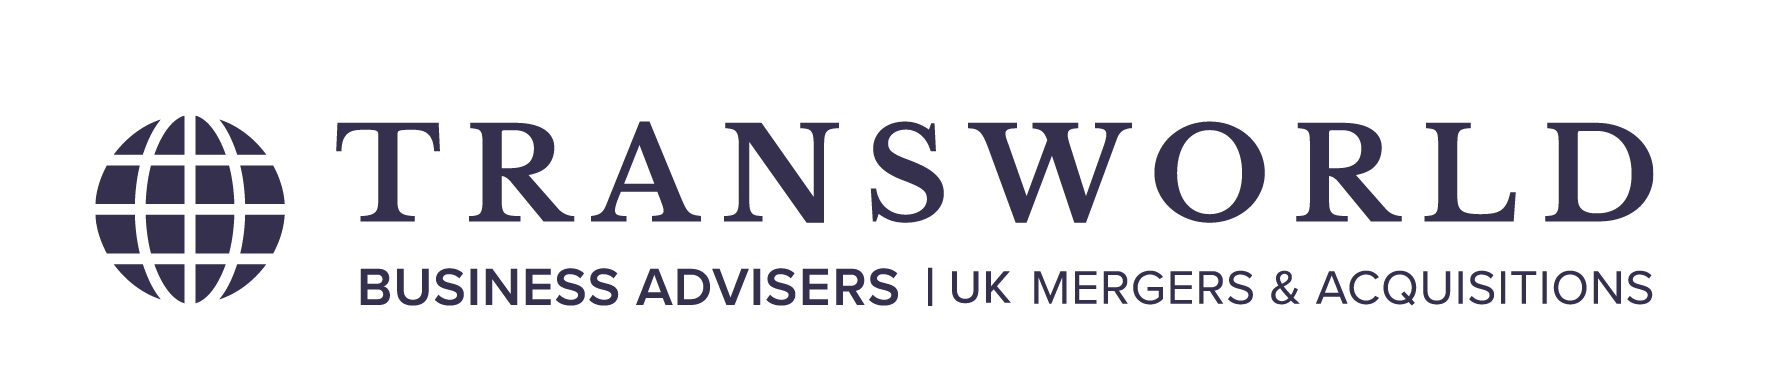 Winner Image - Transworld Business Advisors UK: Mergers and Acquisitions